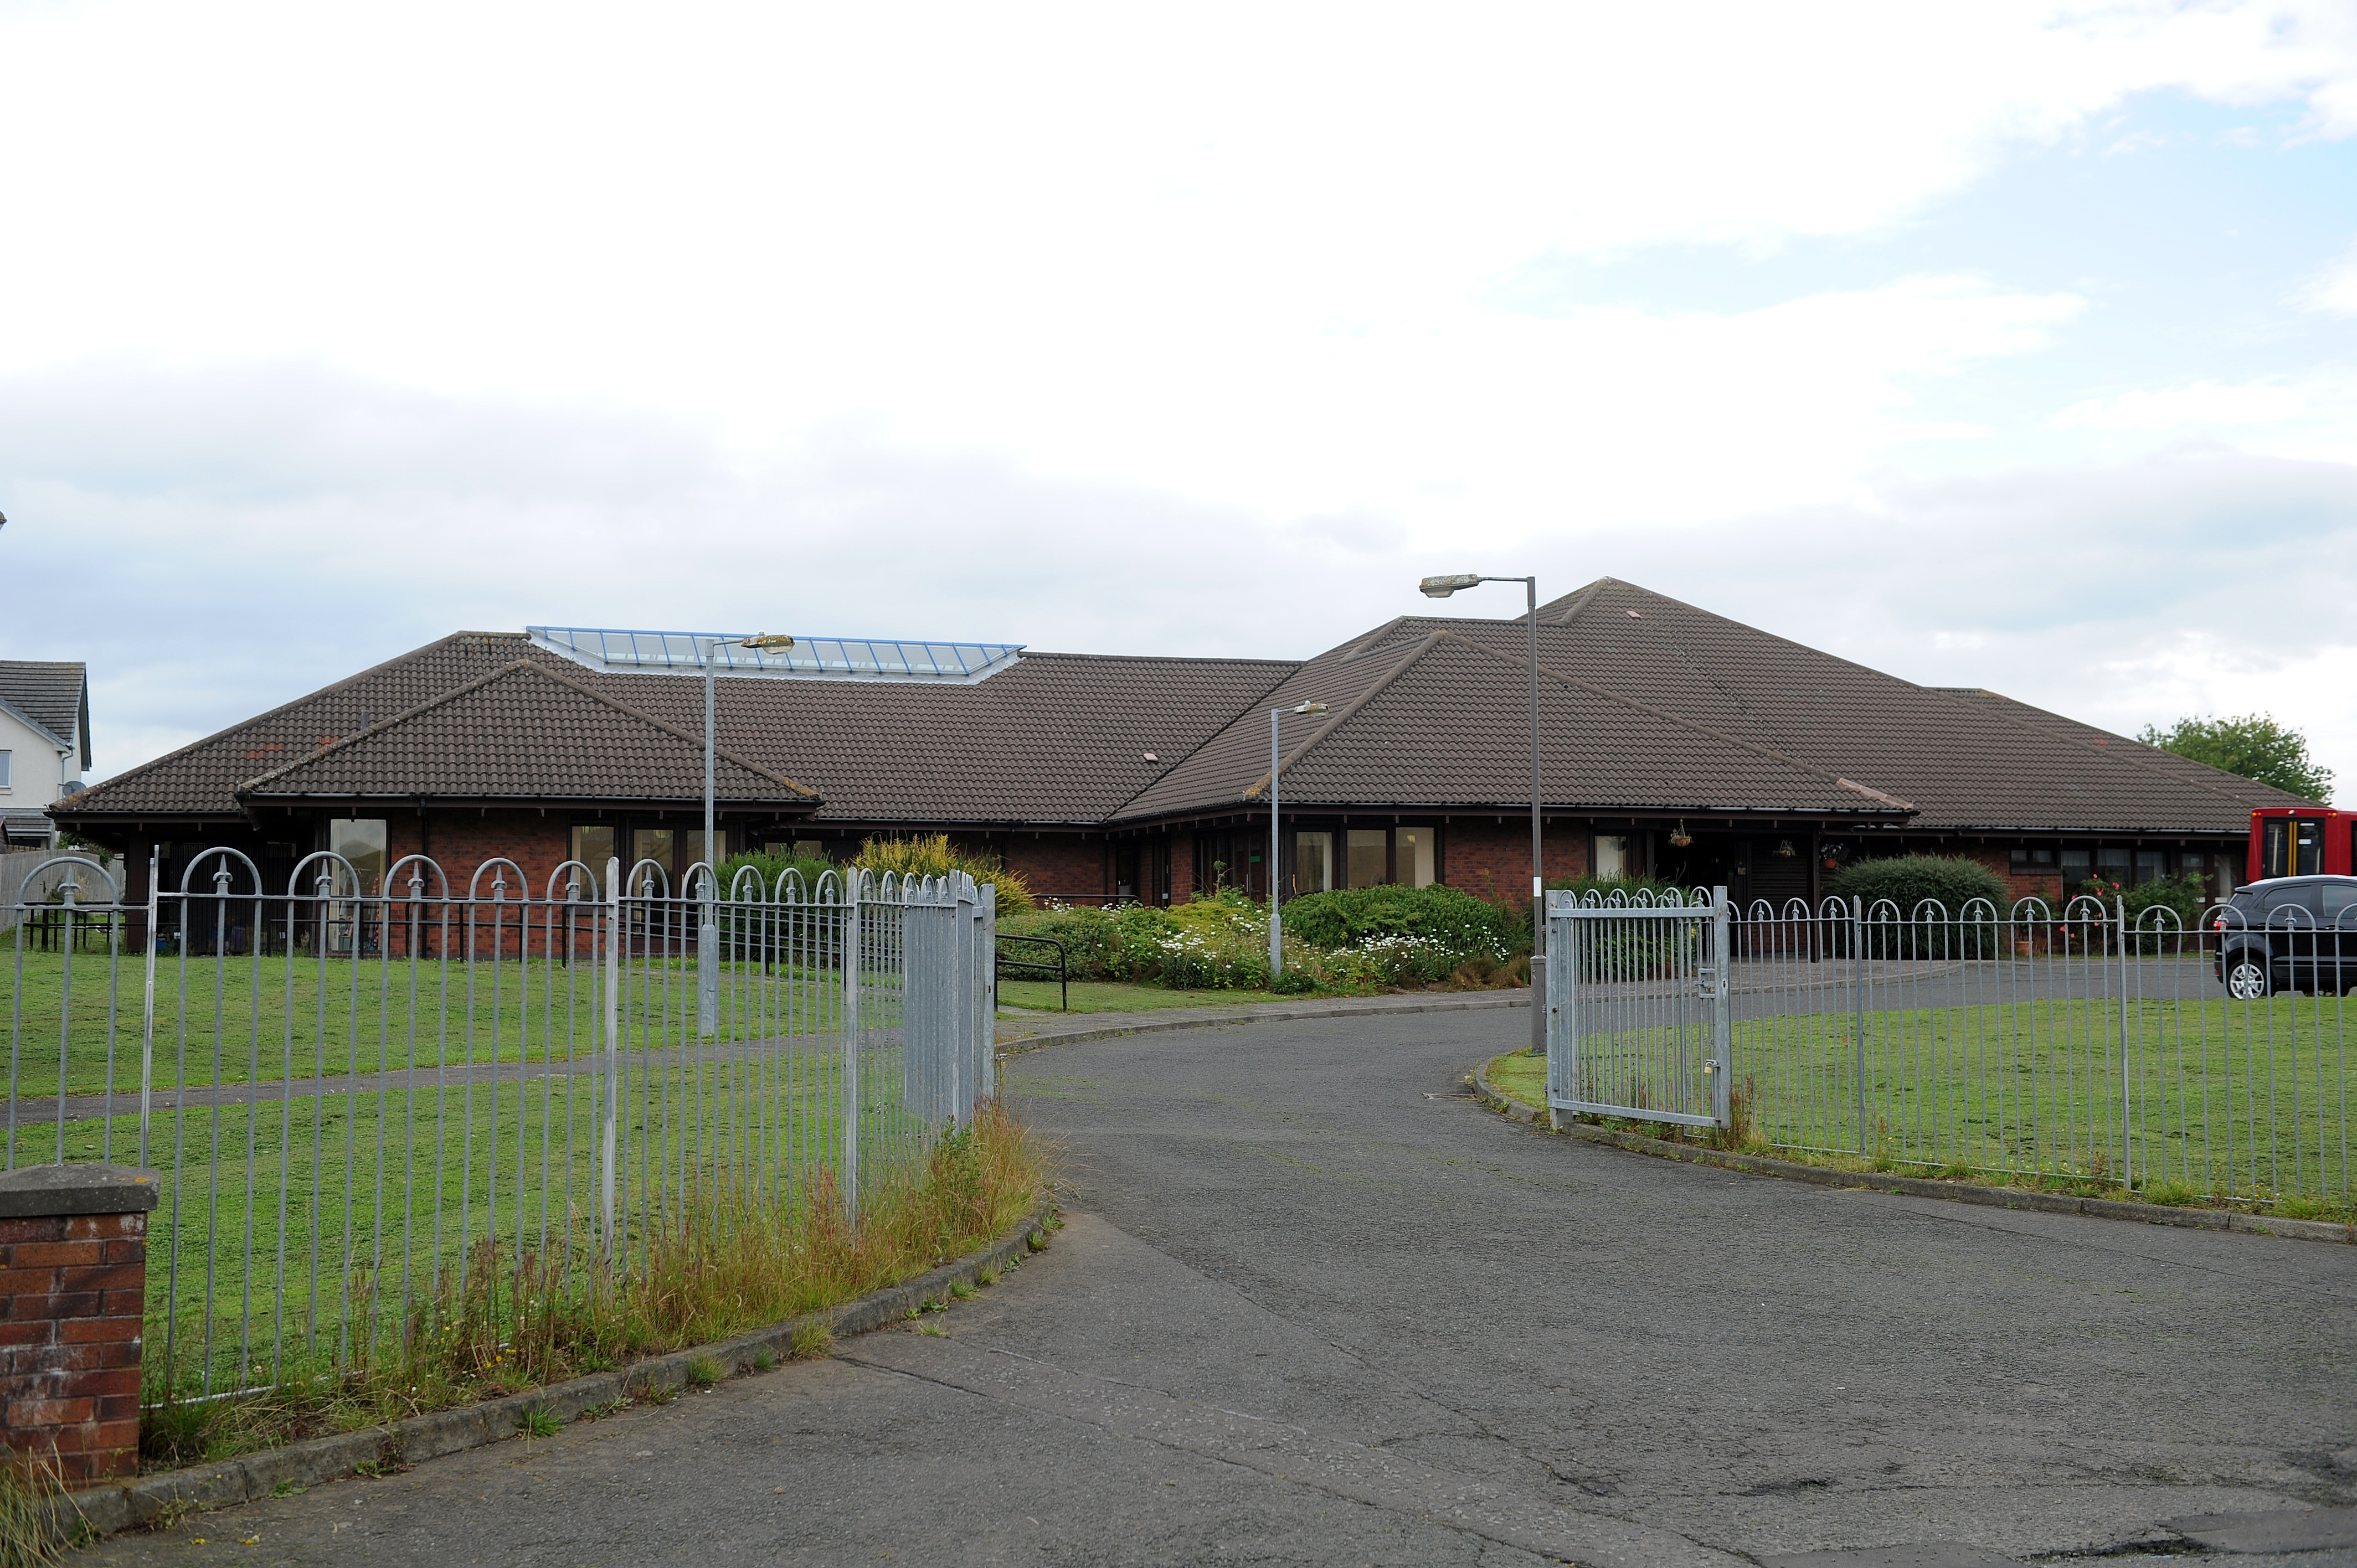 Rosyth Resource Centre was used for elderly day care until 2017